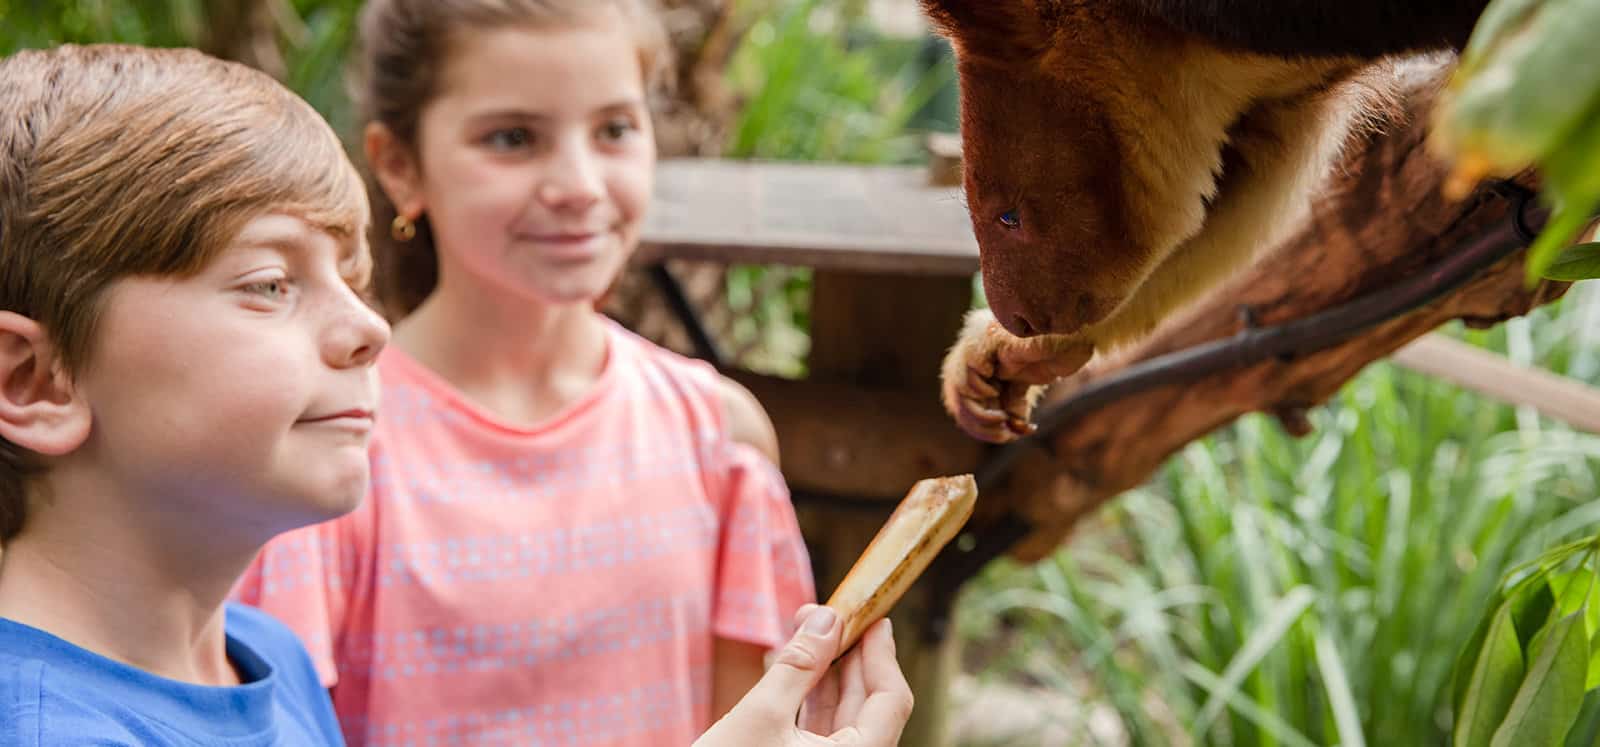 Tree Kangaroo being hand fed by young boy during encounter at Adelaide Zoo